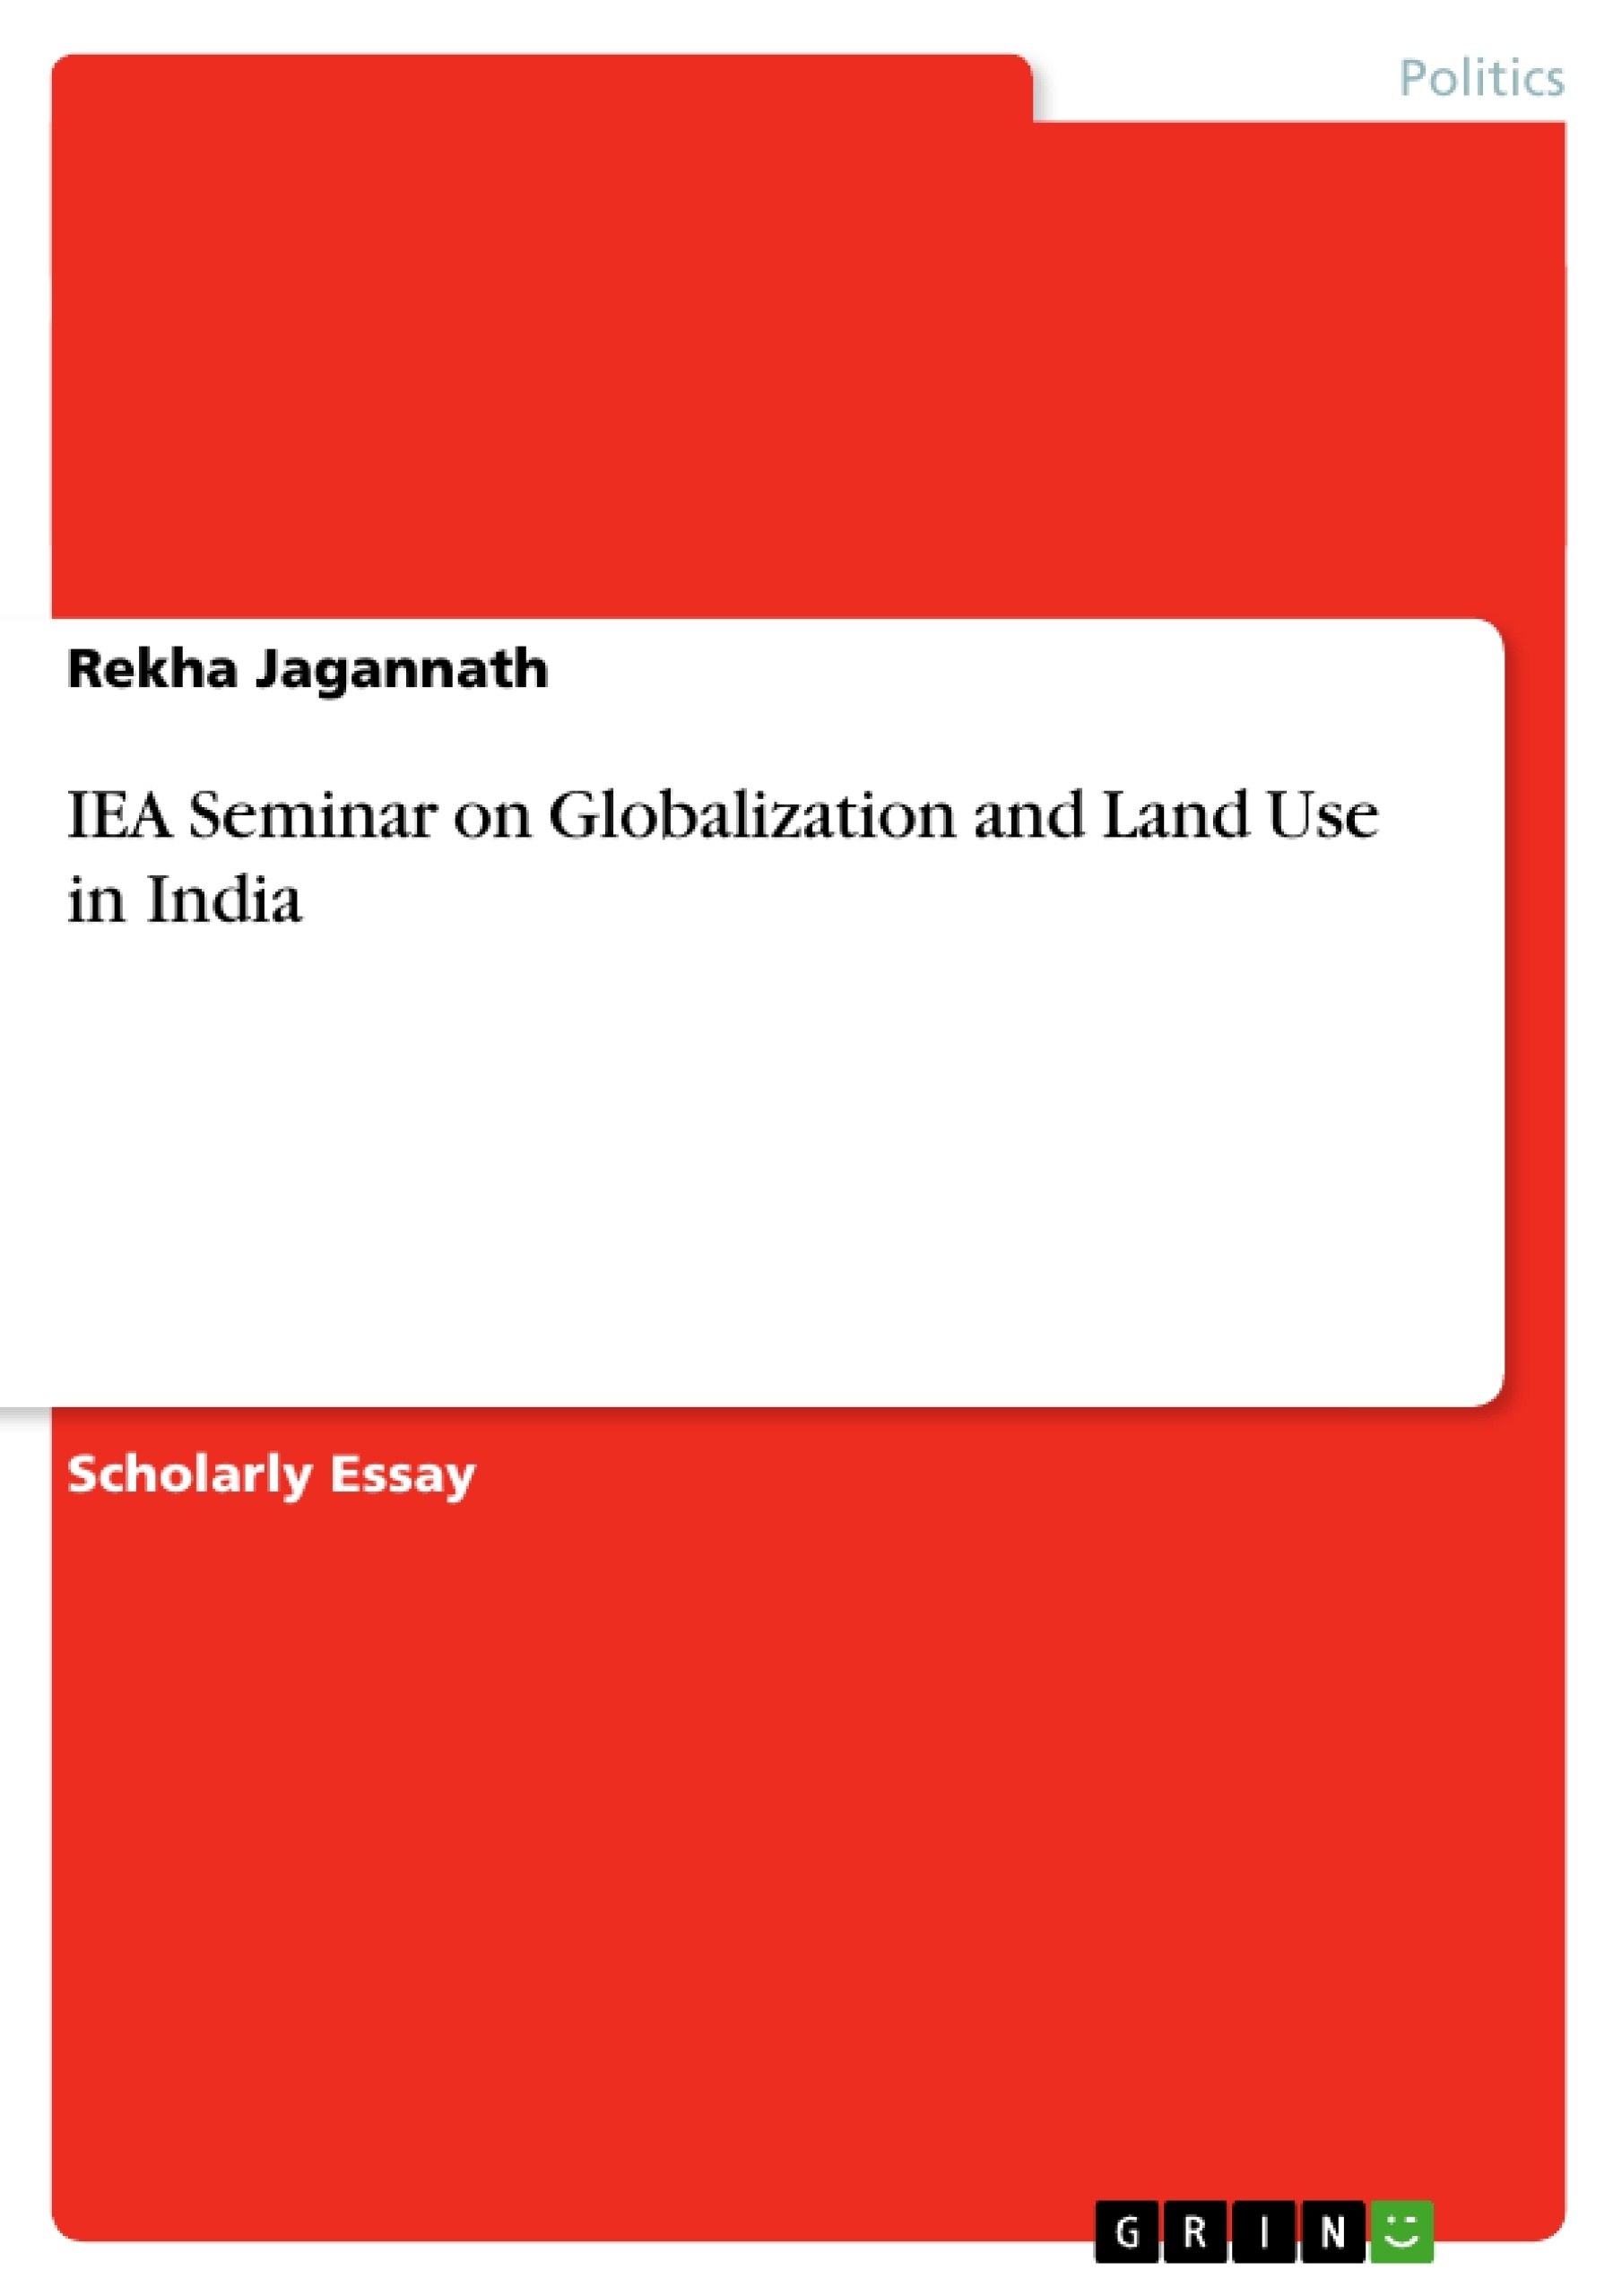 Title: IEA Seminar on Globalization and Land Use in India